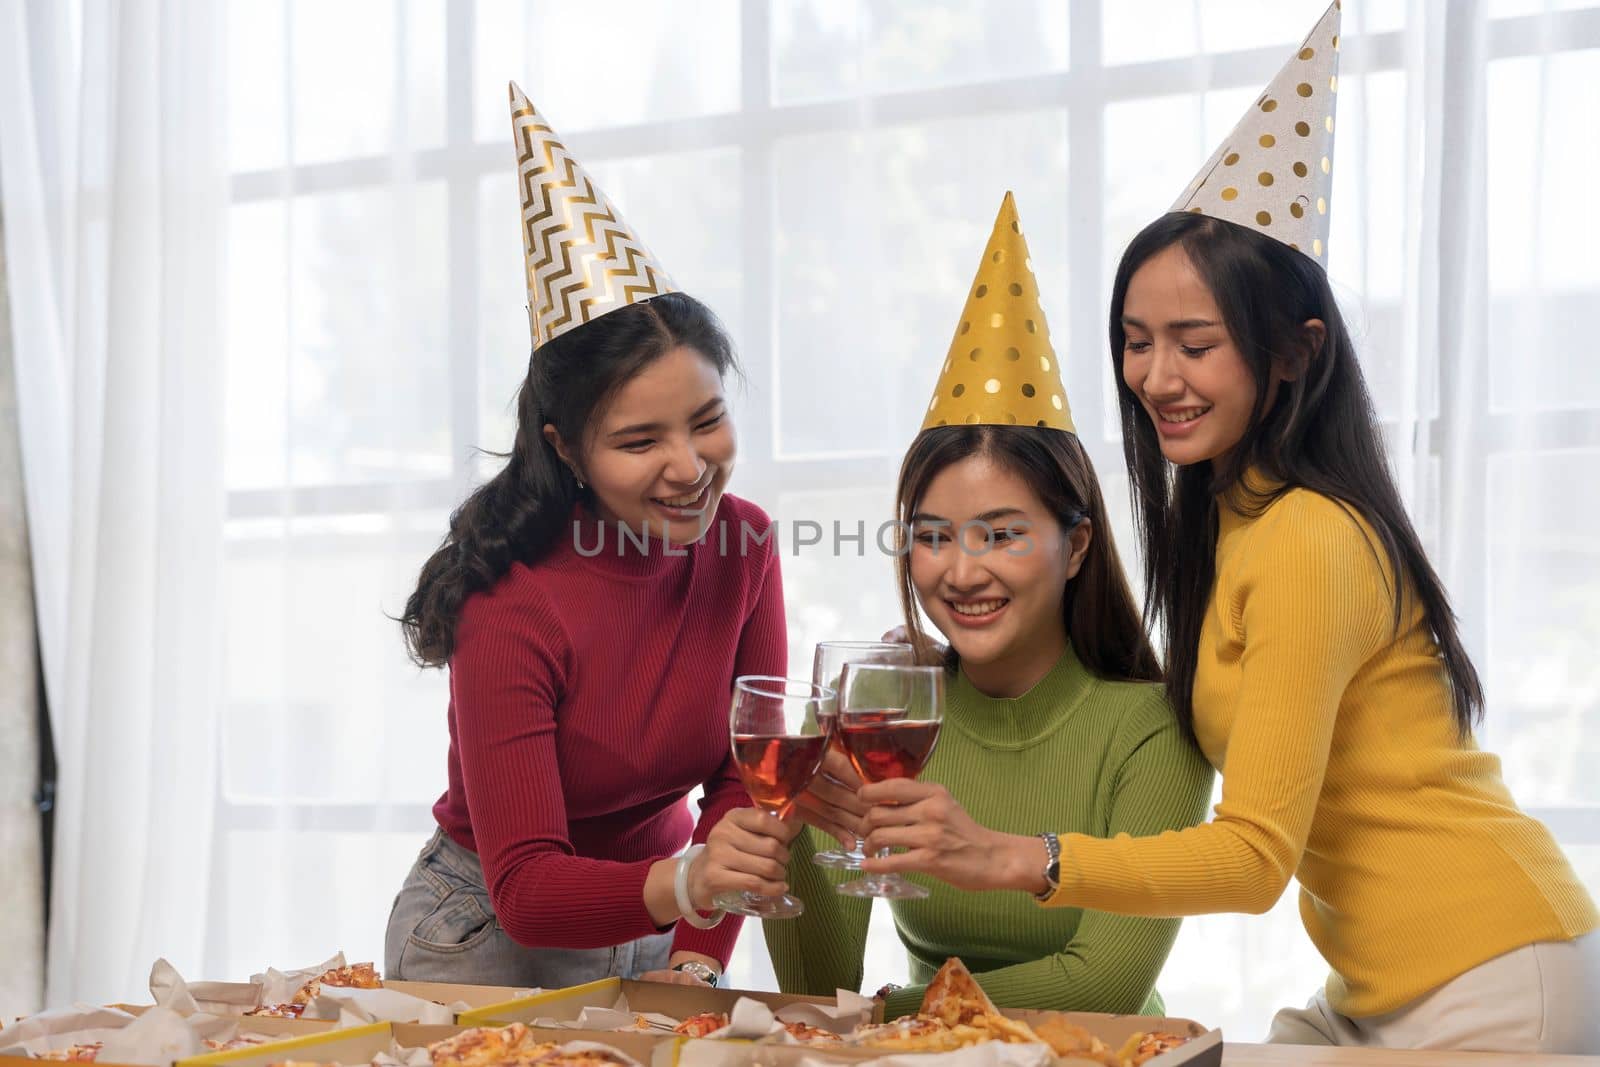 Group of happy young Asian people with friends celebrating clinking glasses during dinner party.